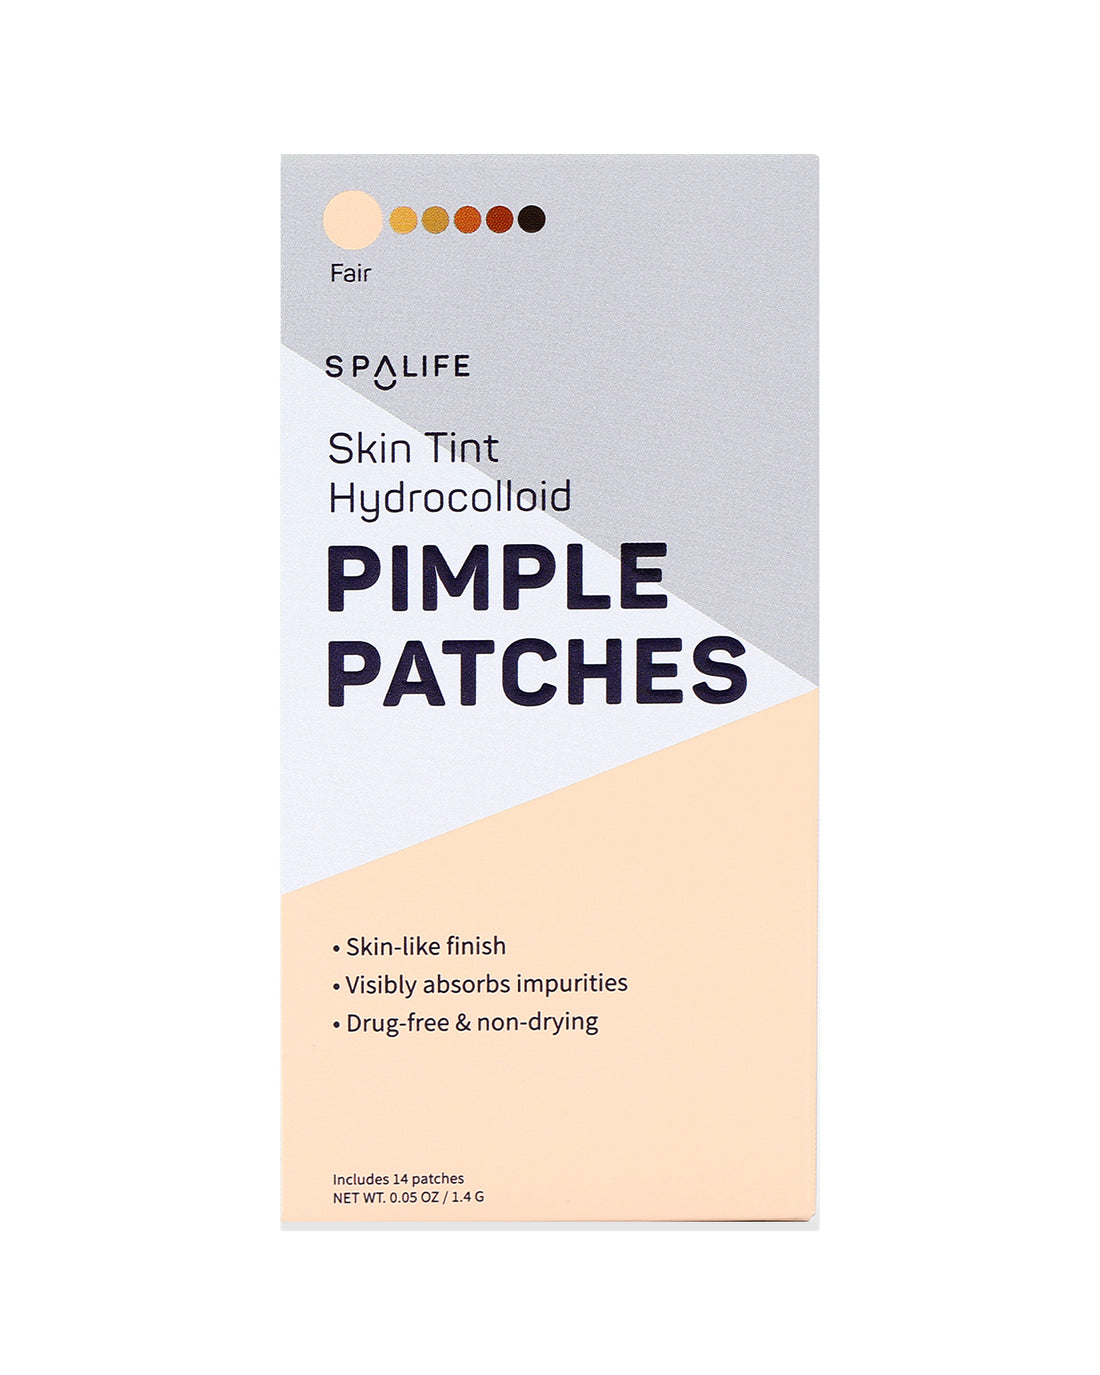 Skin_tint_pimple_patches_packe-900